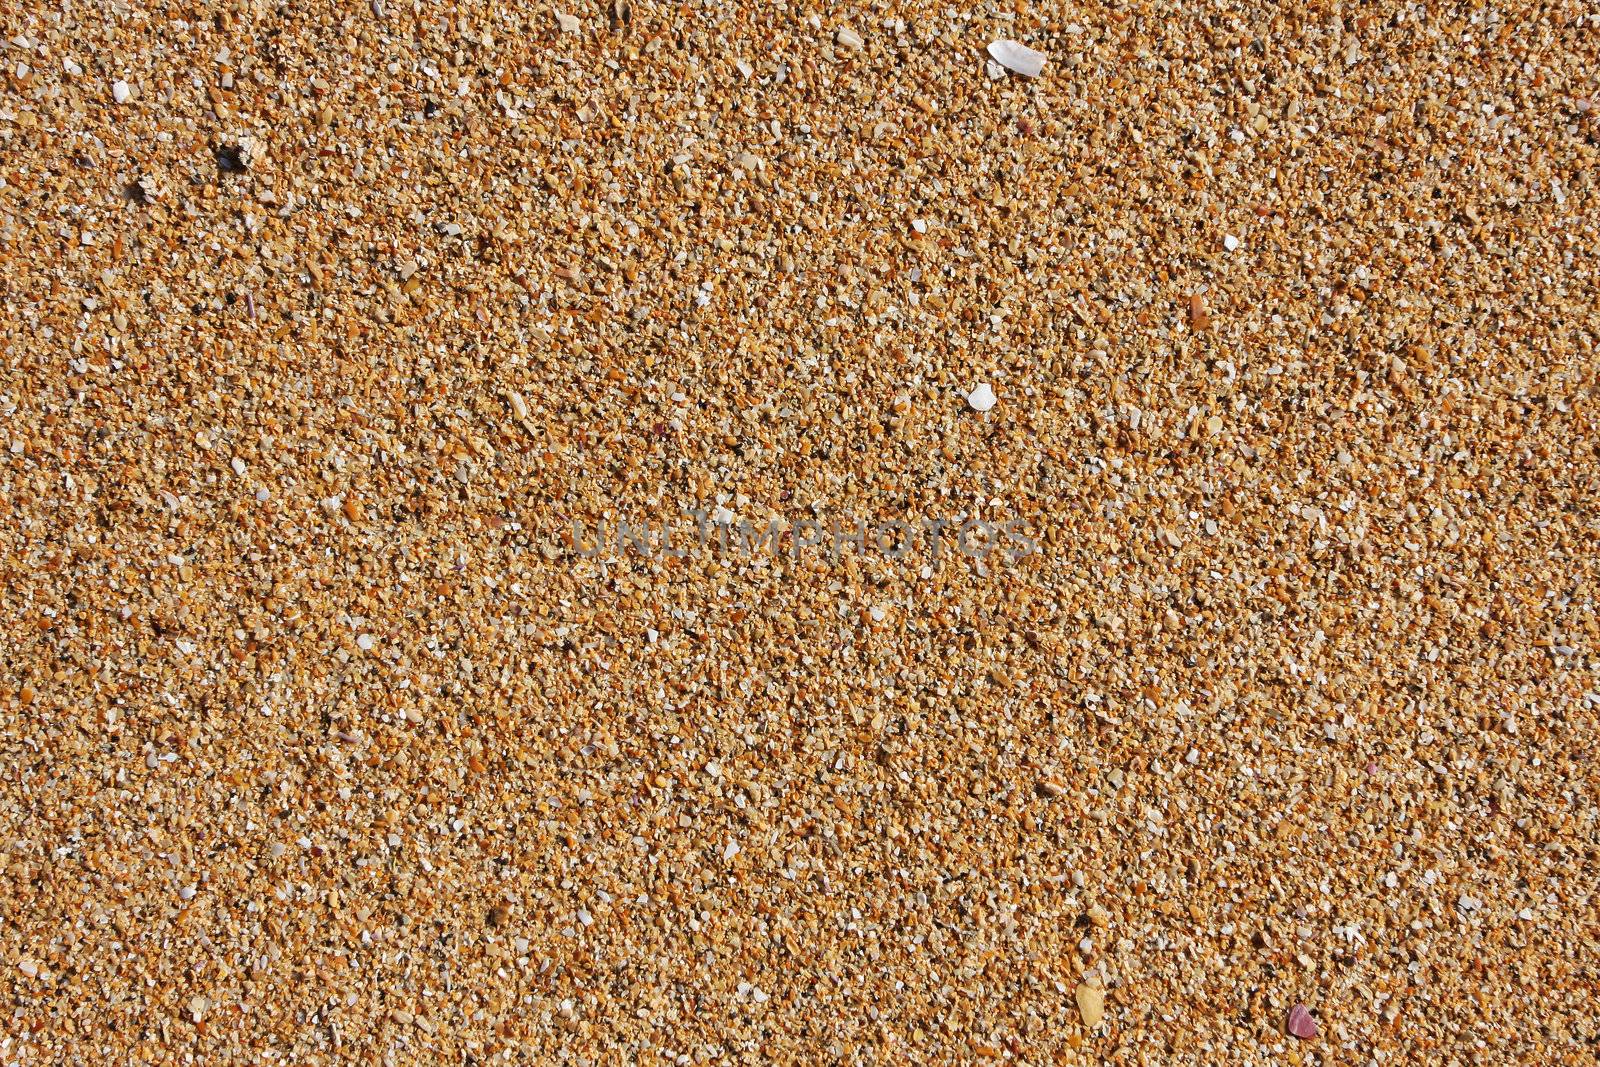 shell sand on the beach with water lines, great detail and texture